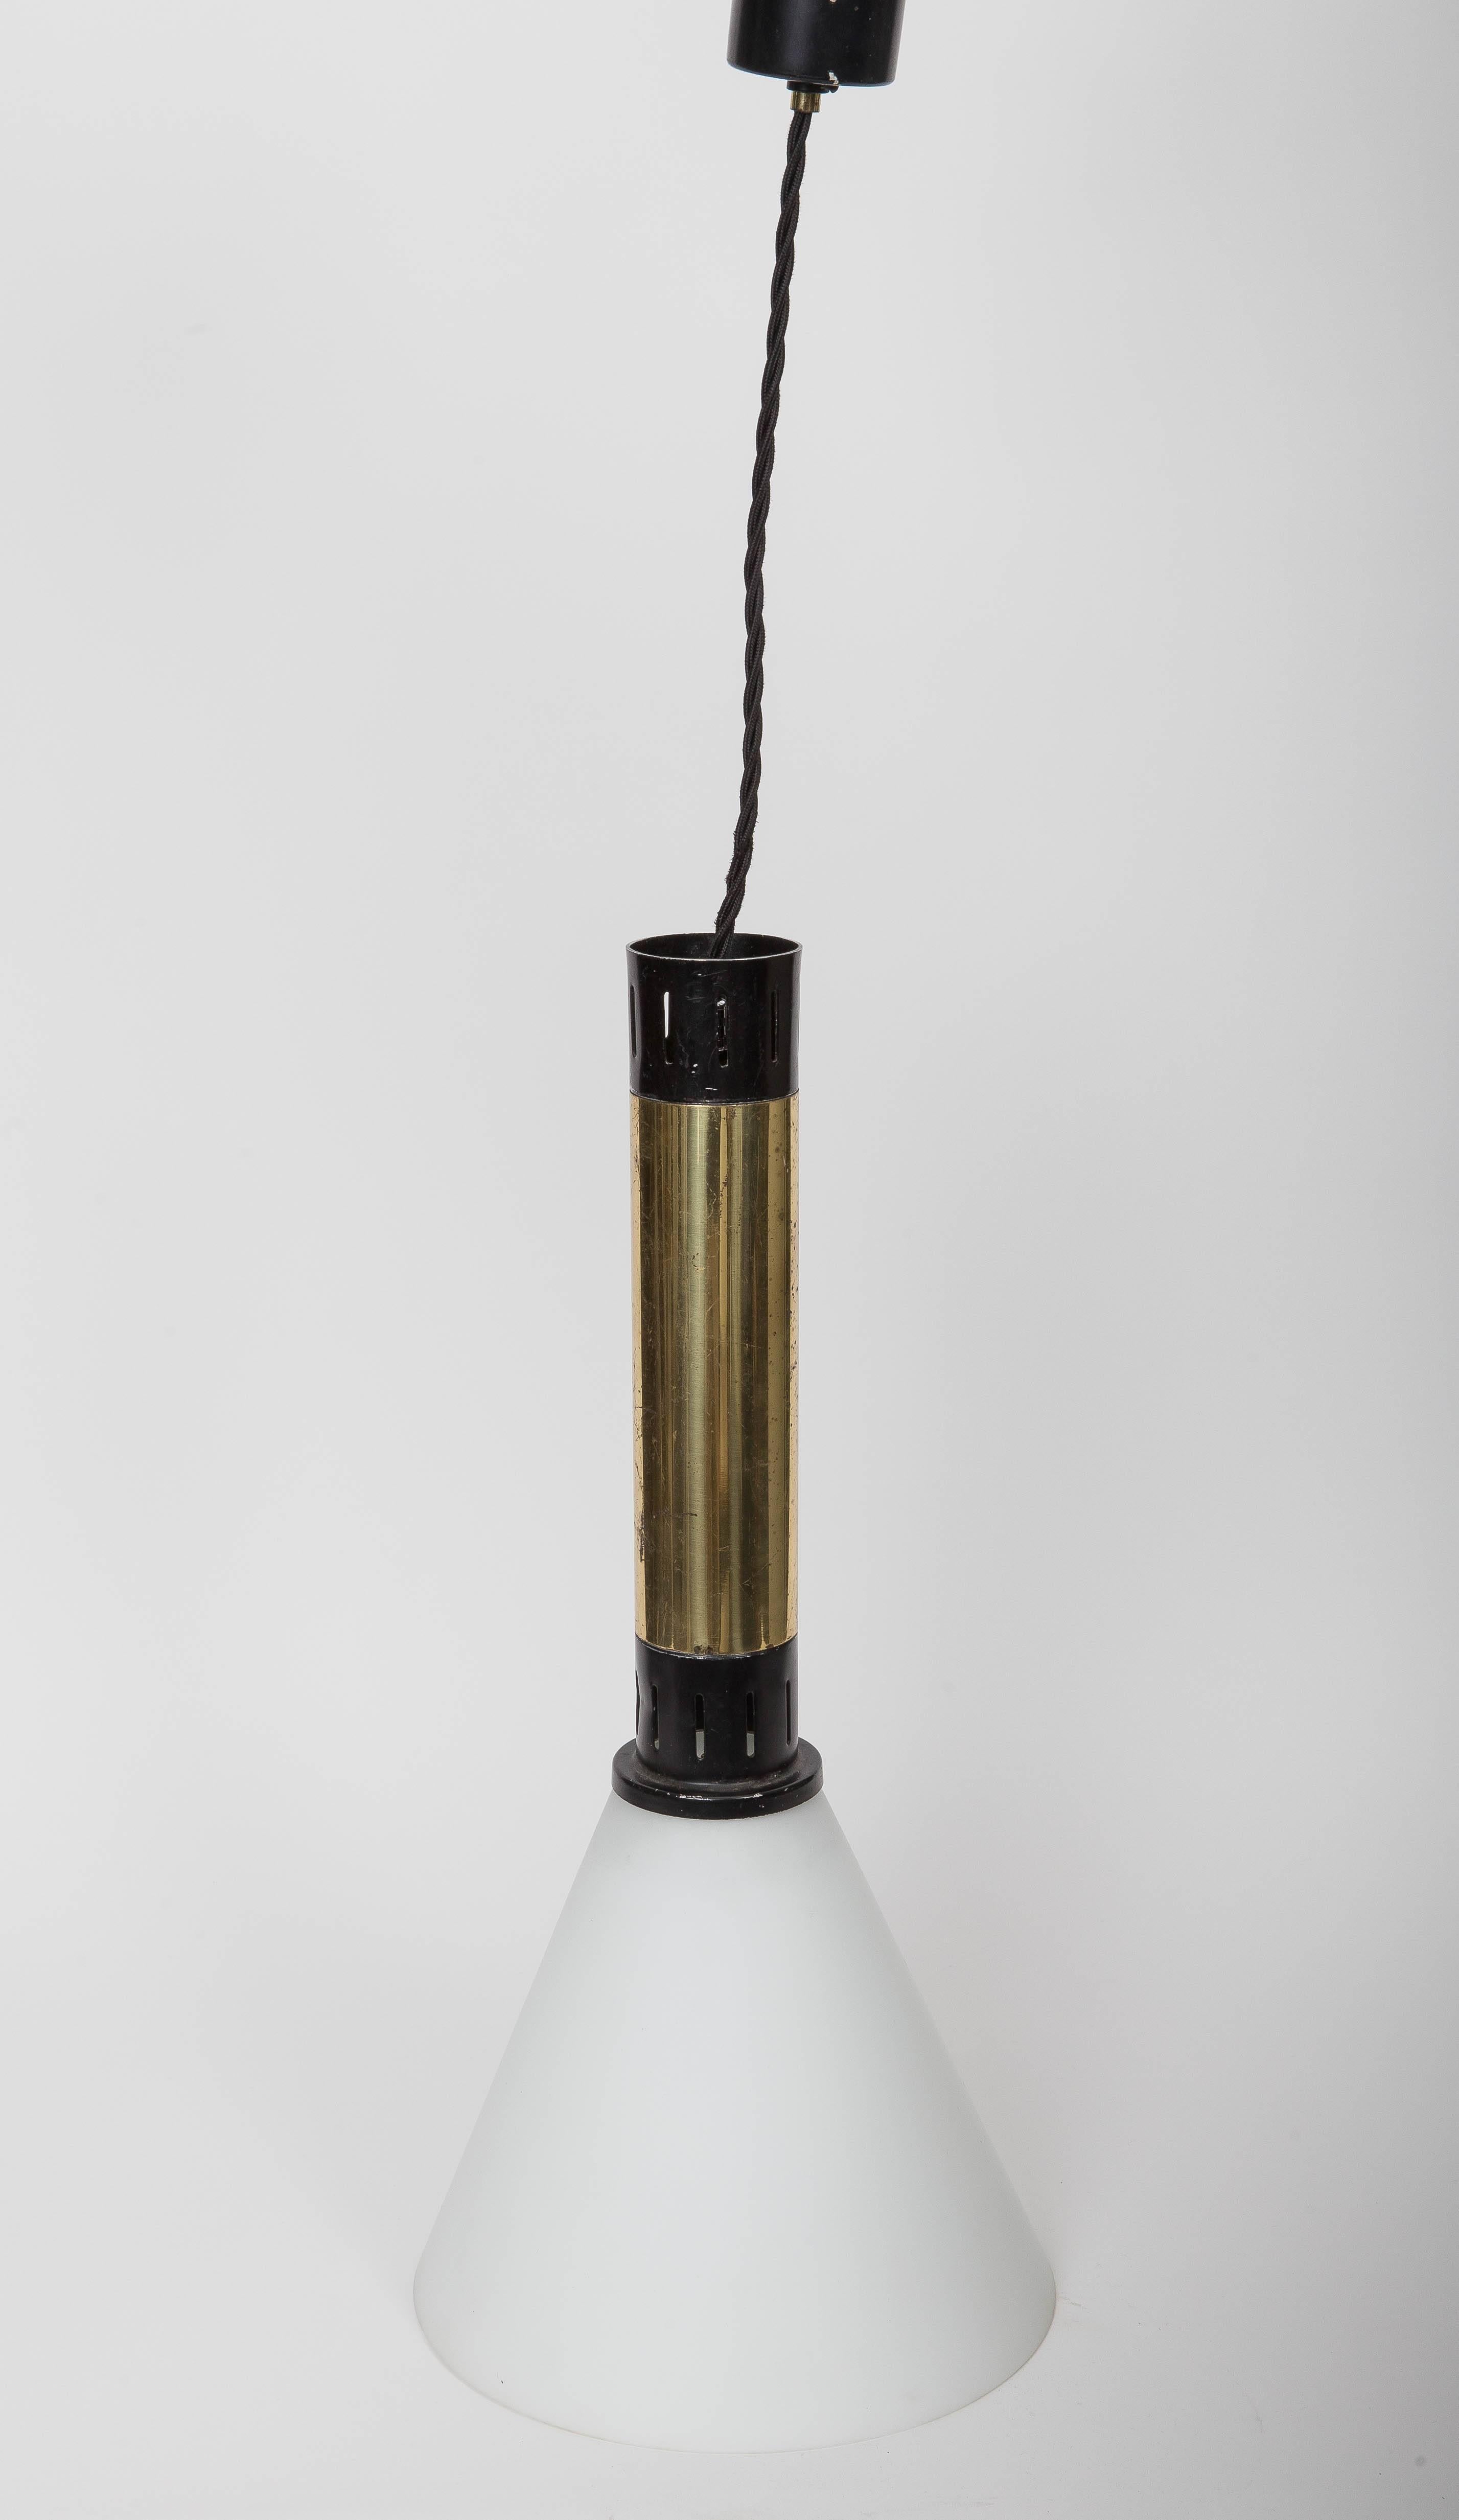 Sleek Hanging Light in Varnished Metal and Brass by Stilnovo, Italy, c. 1950s. 

